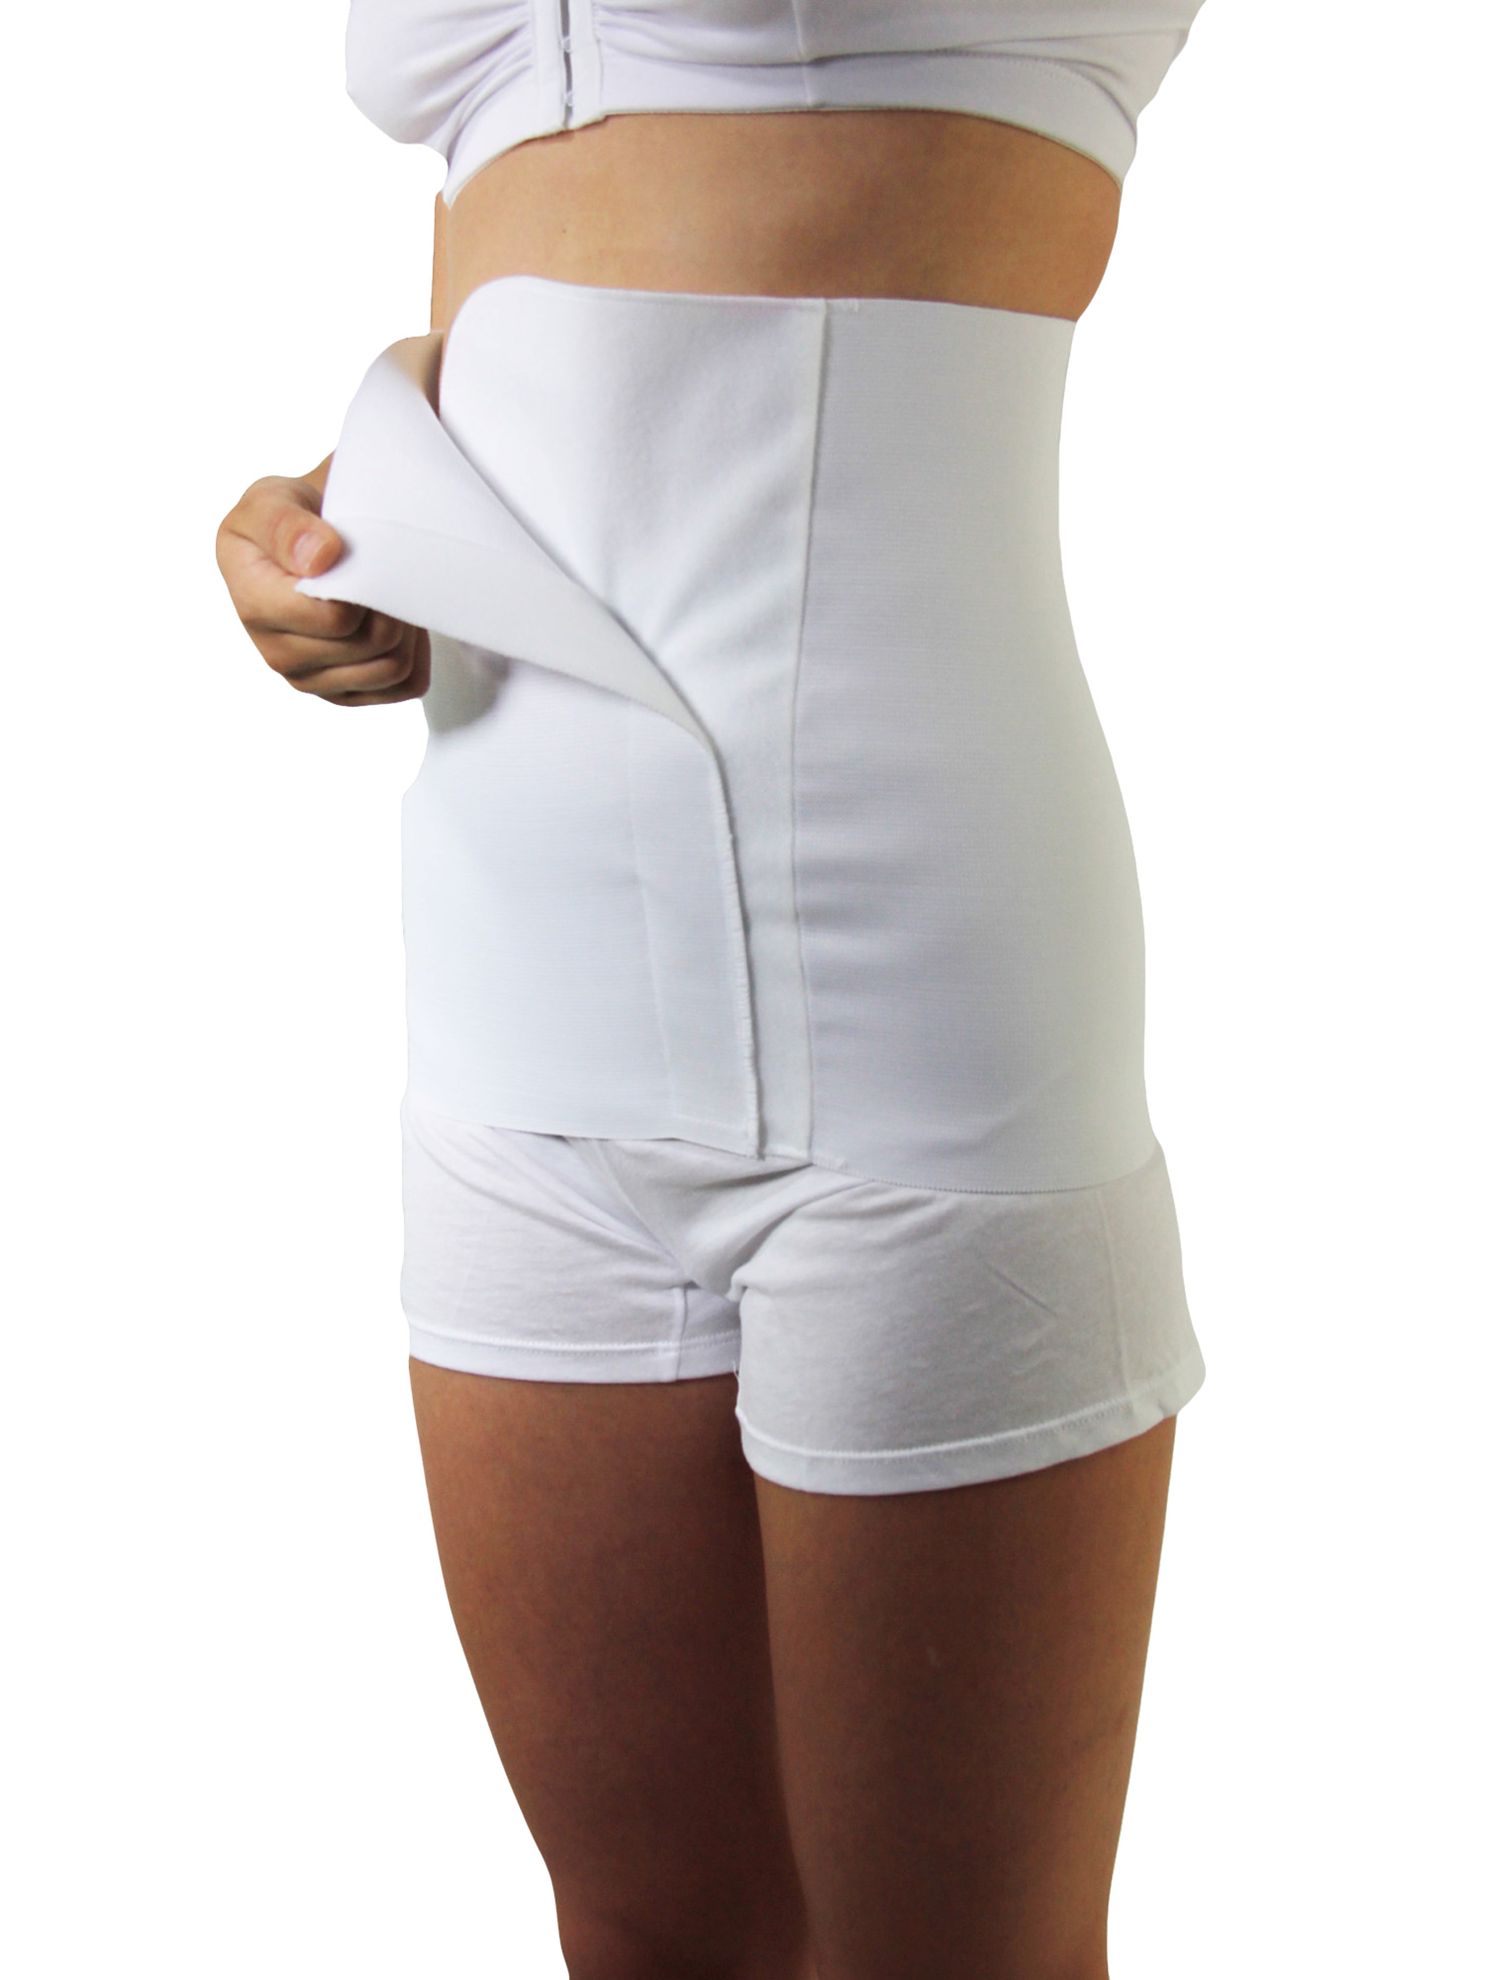 https://www.f2mbinders.com/images/thumbs/0000049_post-delivery-abdominal-binder-12-inch-with-velcro-closure.jpeg